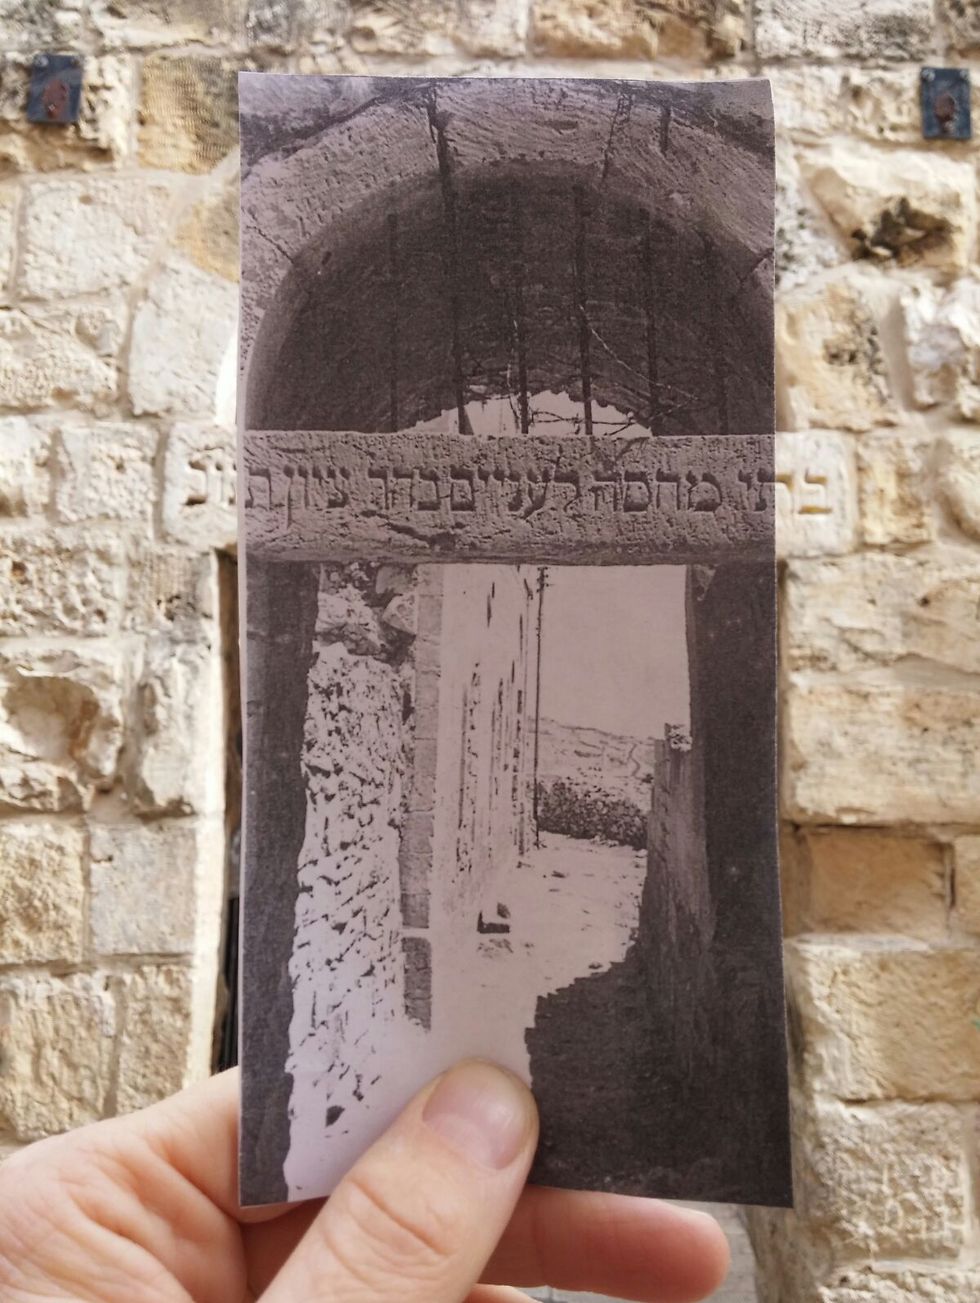 Entrance gate to shelters in the Old City of Jerusalem,1967